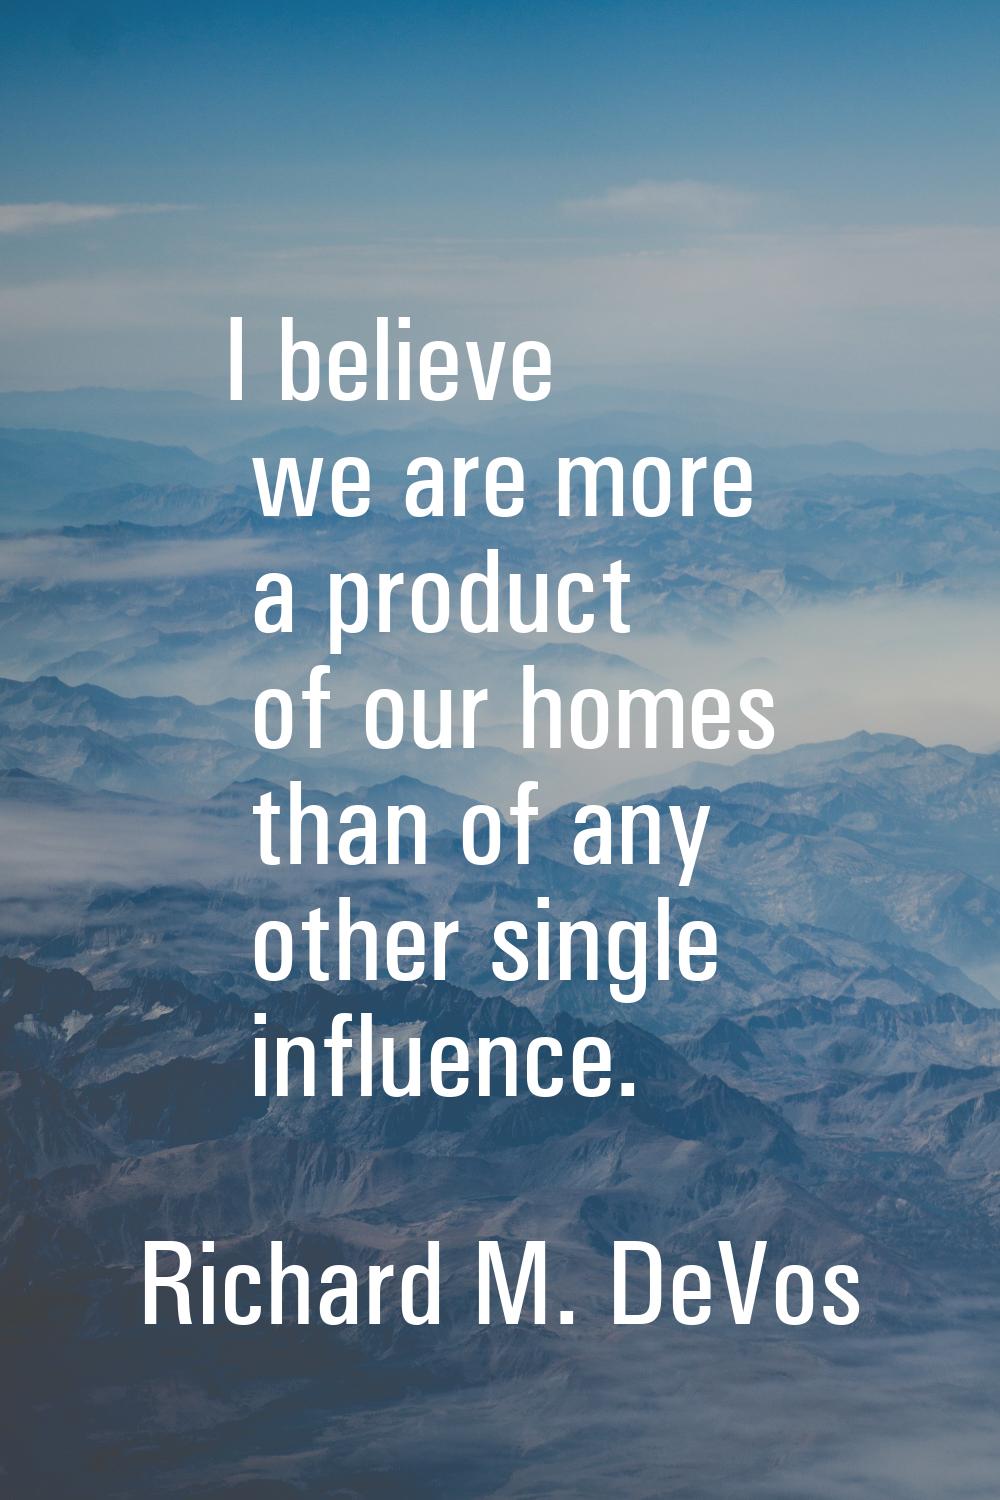 I believe we are more a product of our homes than of any other single influence.